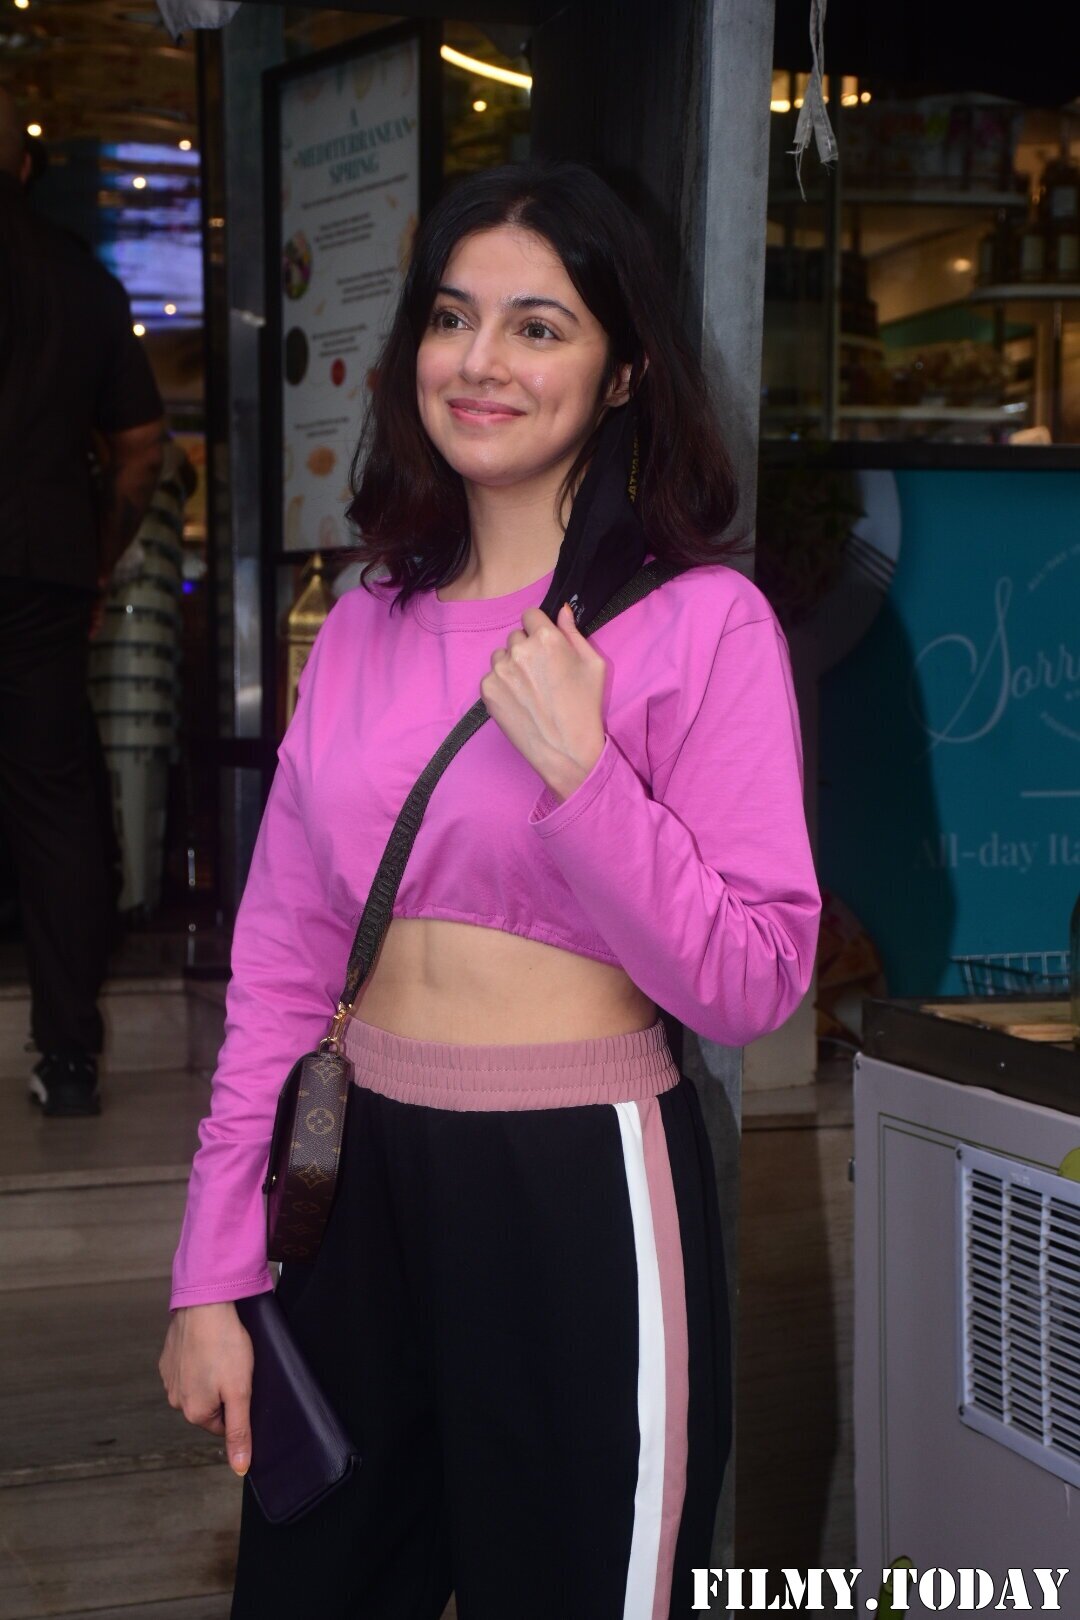 Divya Khosla - Photos: Celebs Spotted At Foodhall In Bandra | Picture 1780192